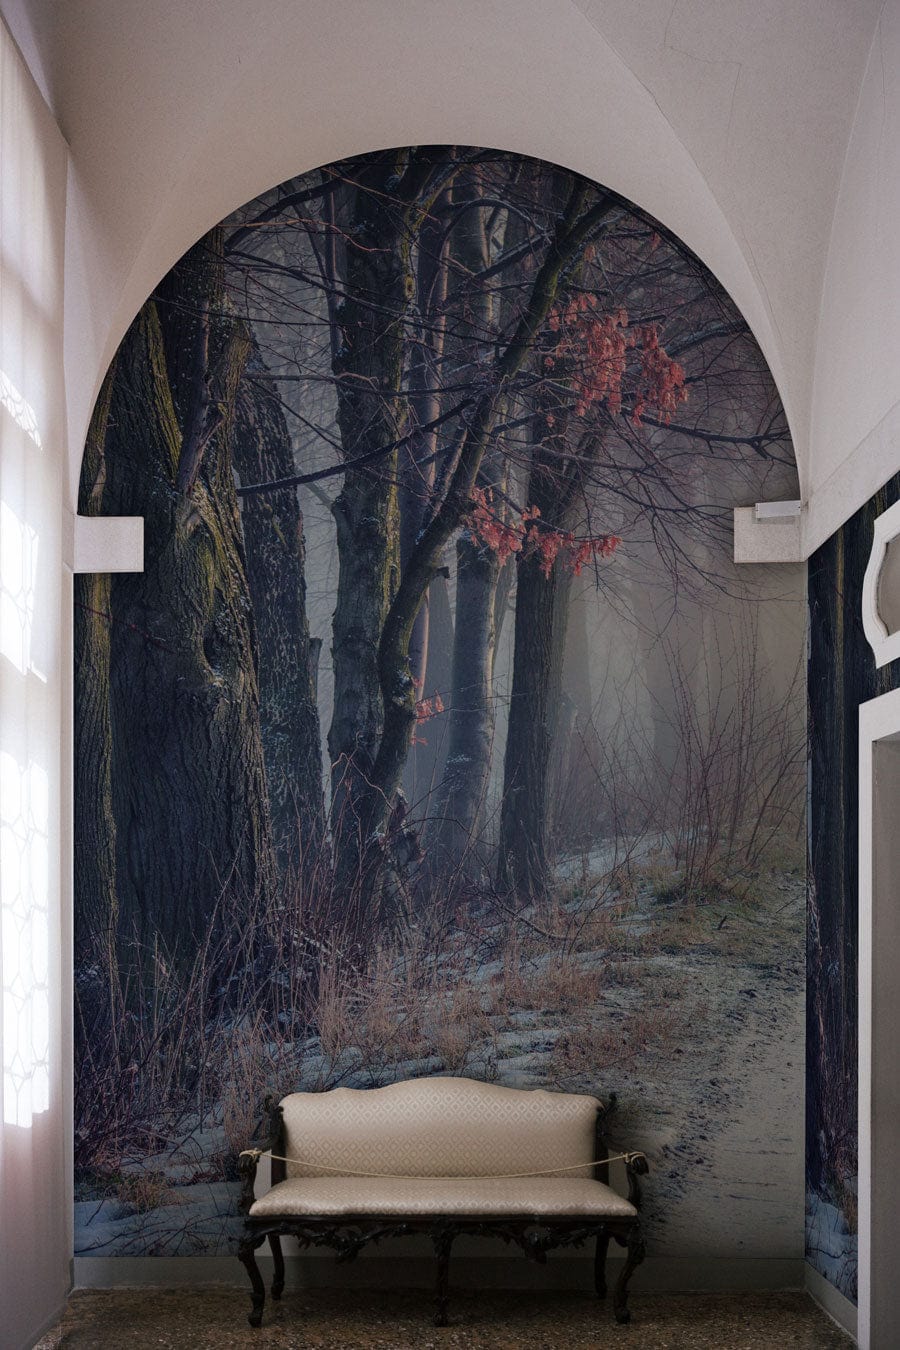 A snow-covered trail in the woods is shown on a wallpaper mural for a hallway